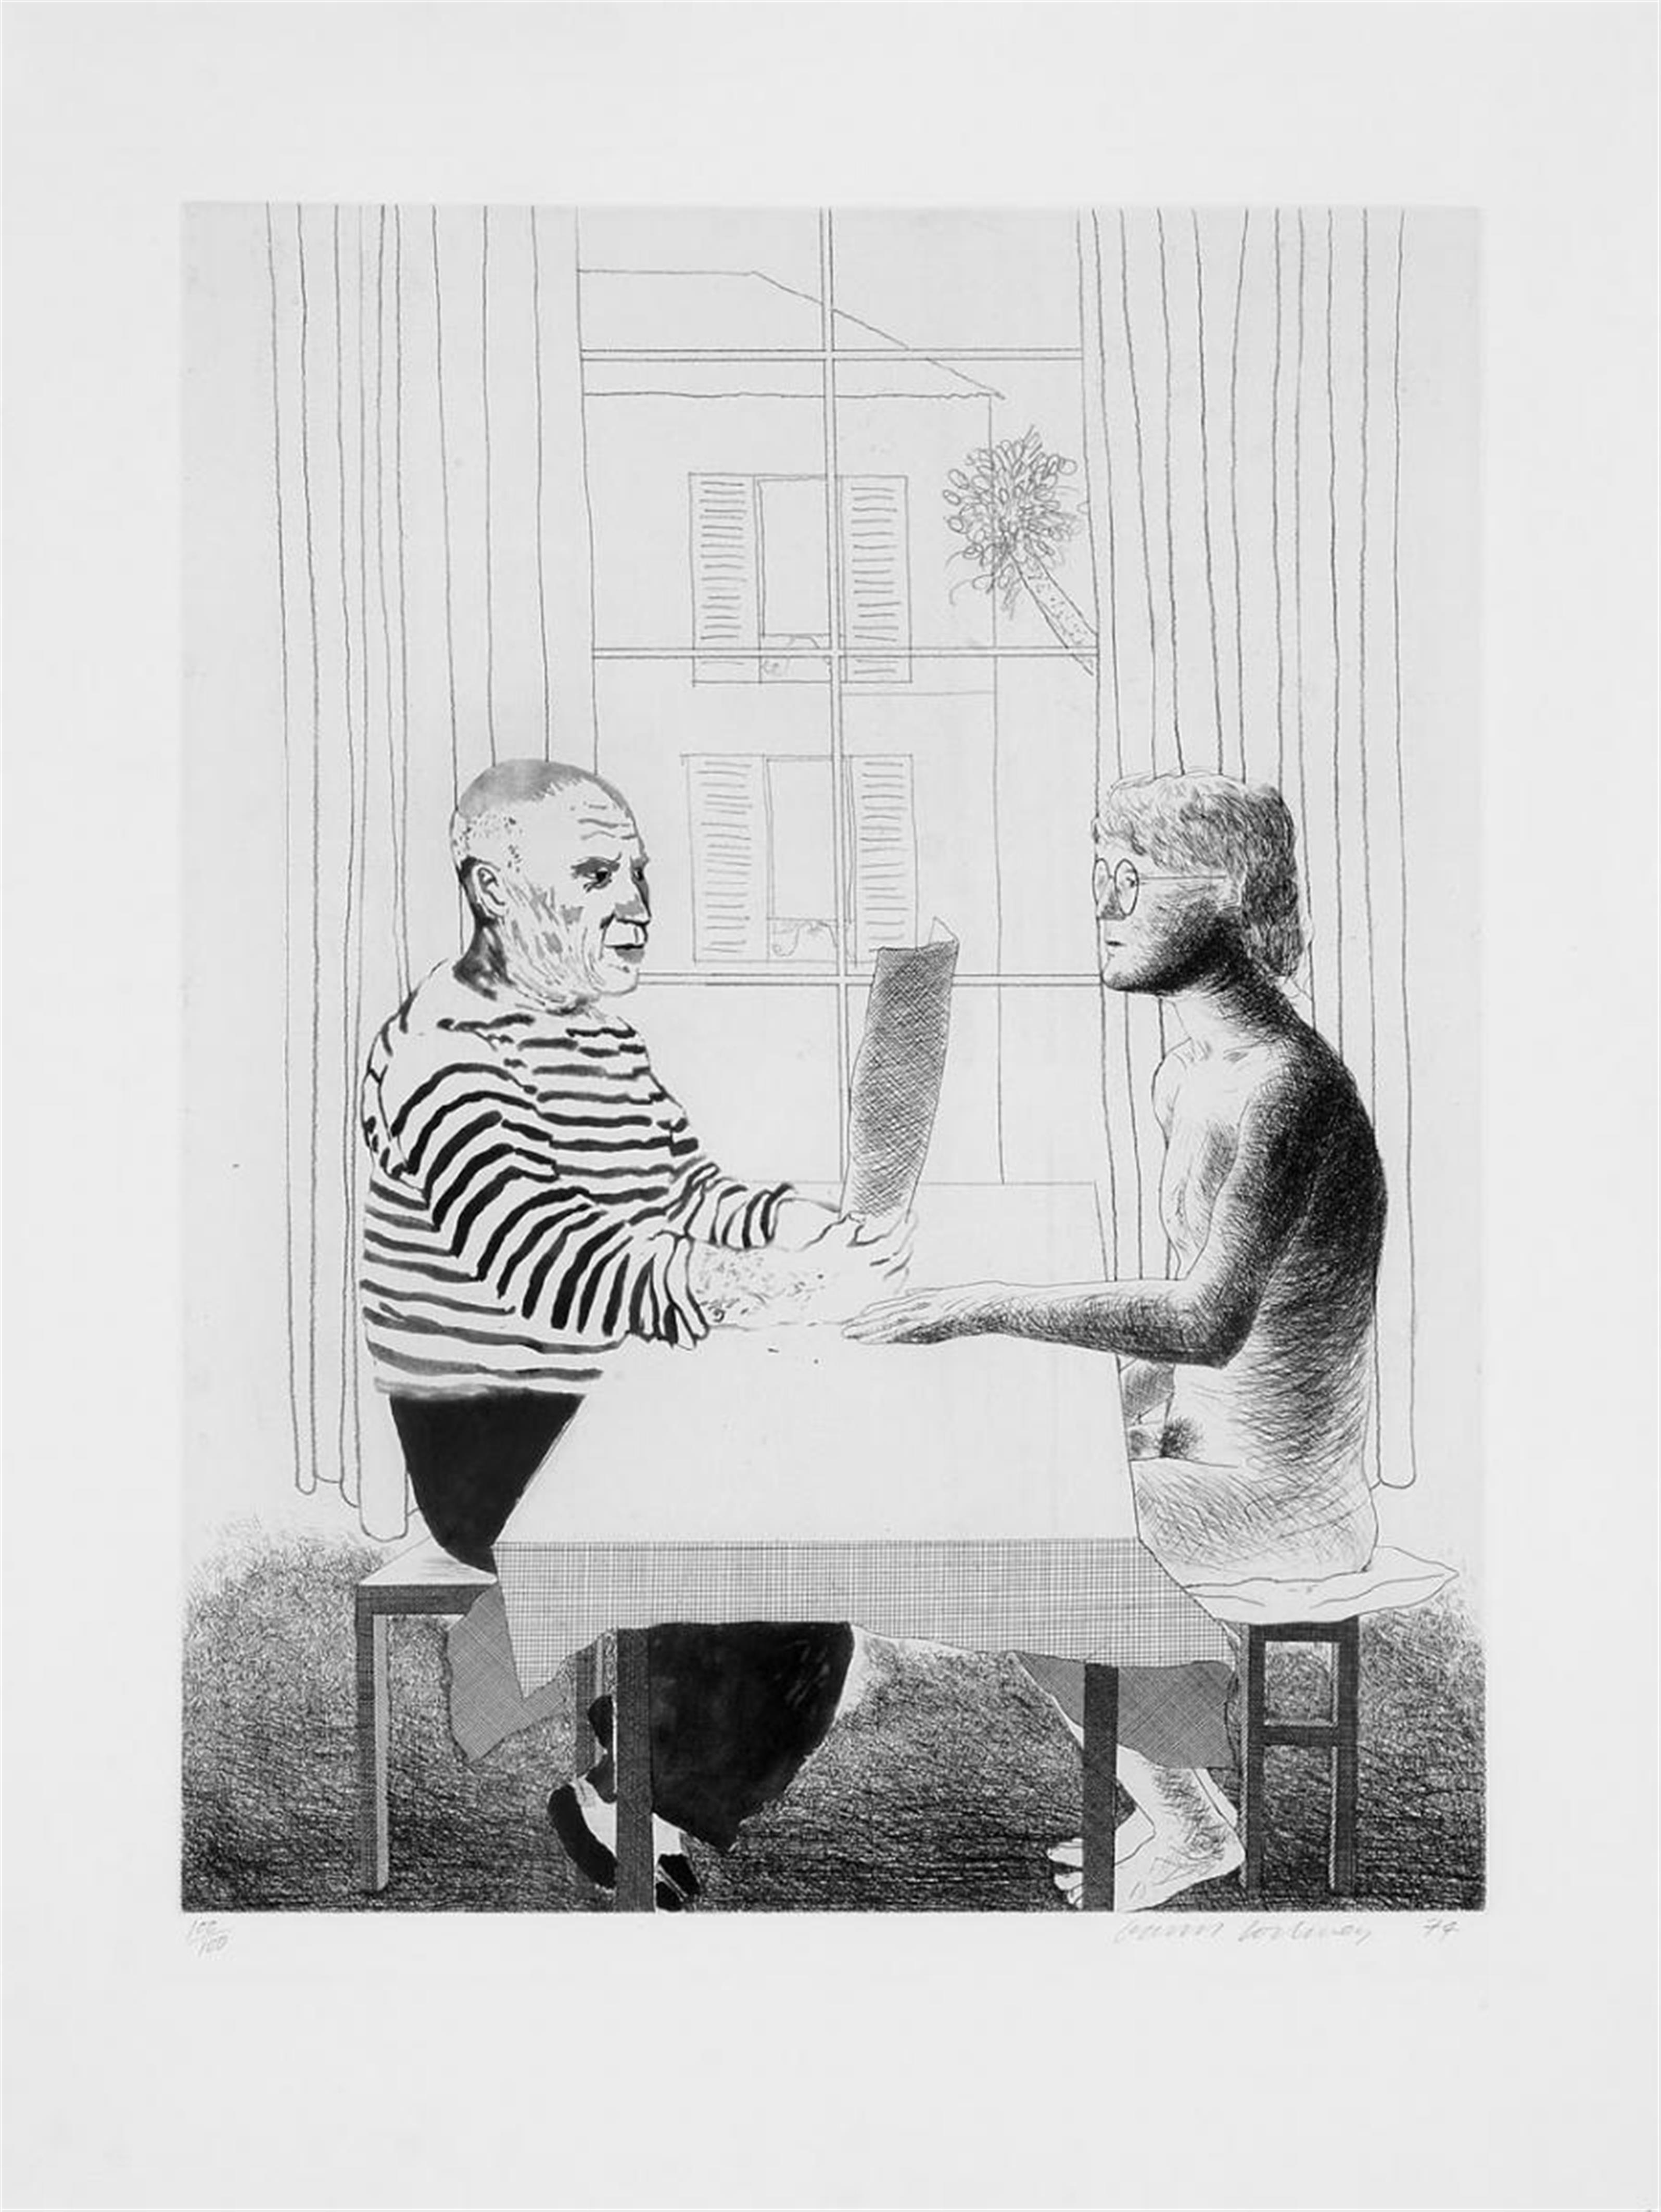 David Hockney - The Student: Homage to Picasso - image-1